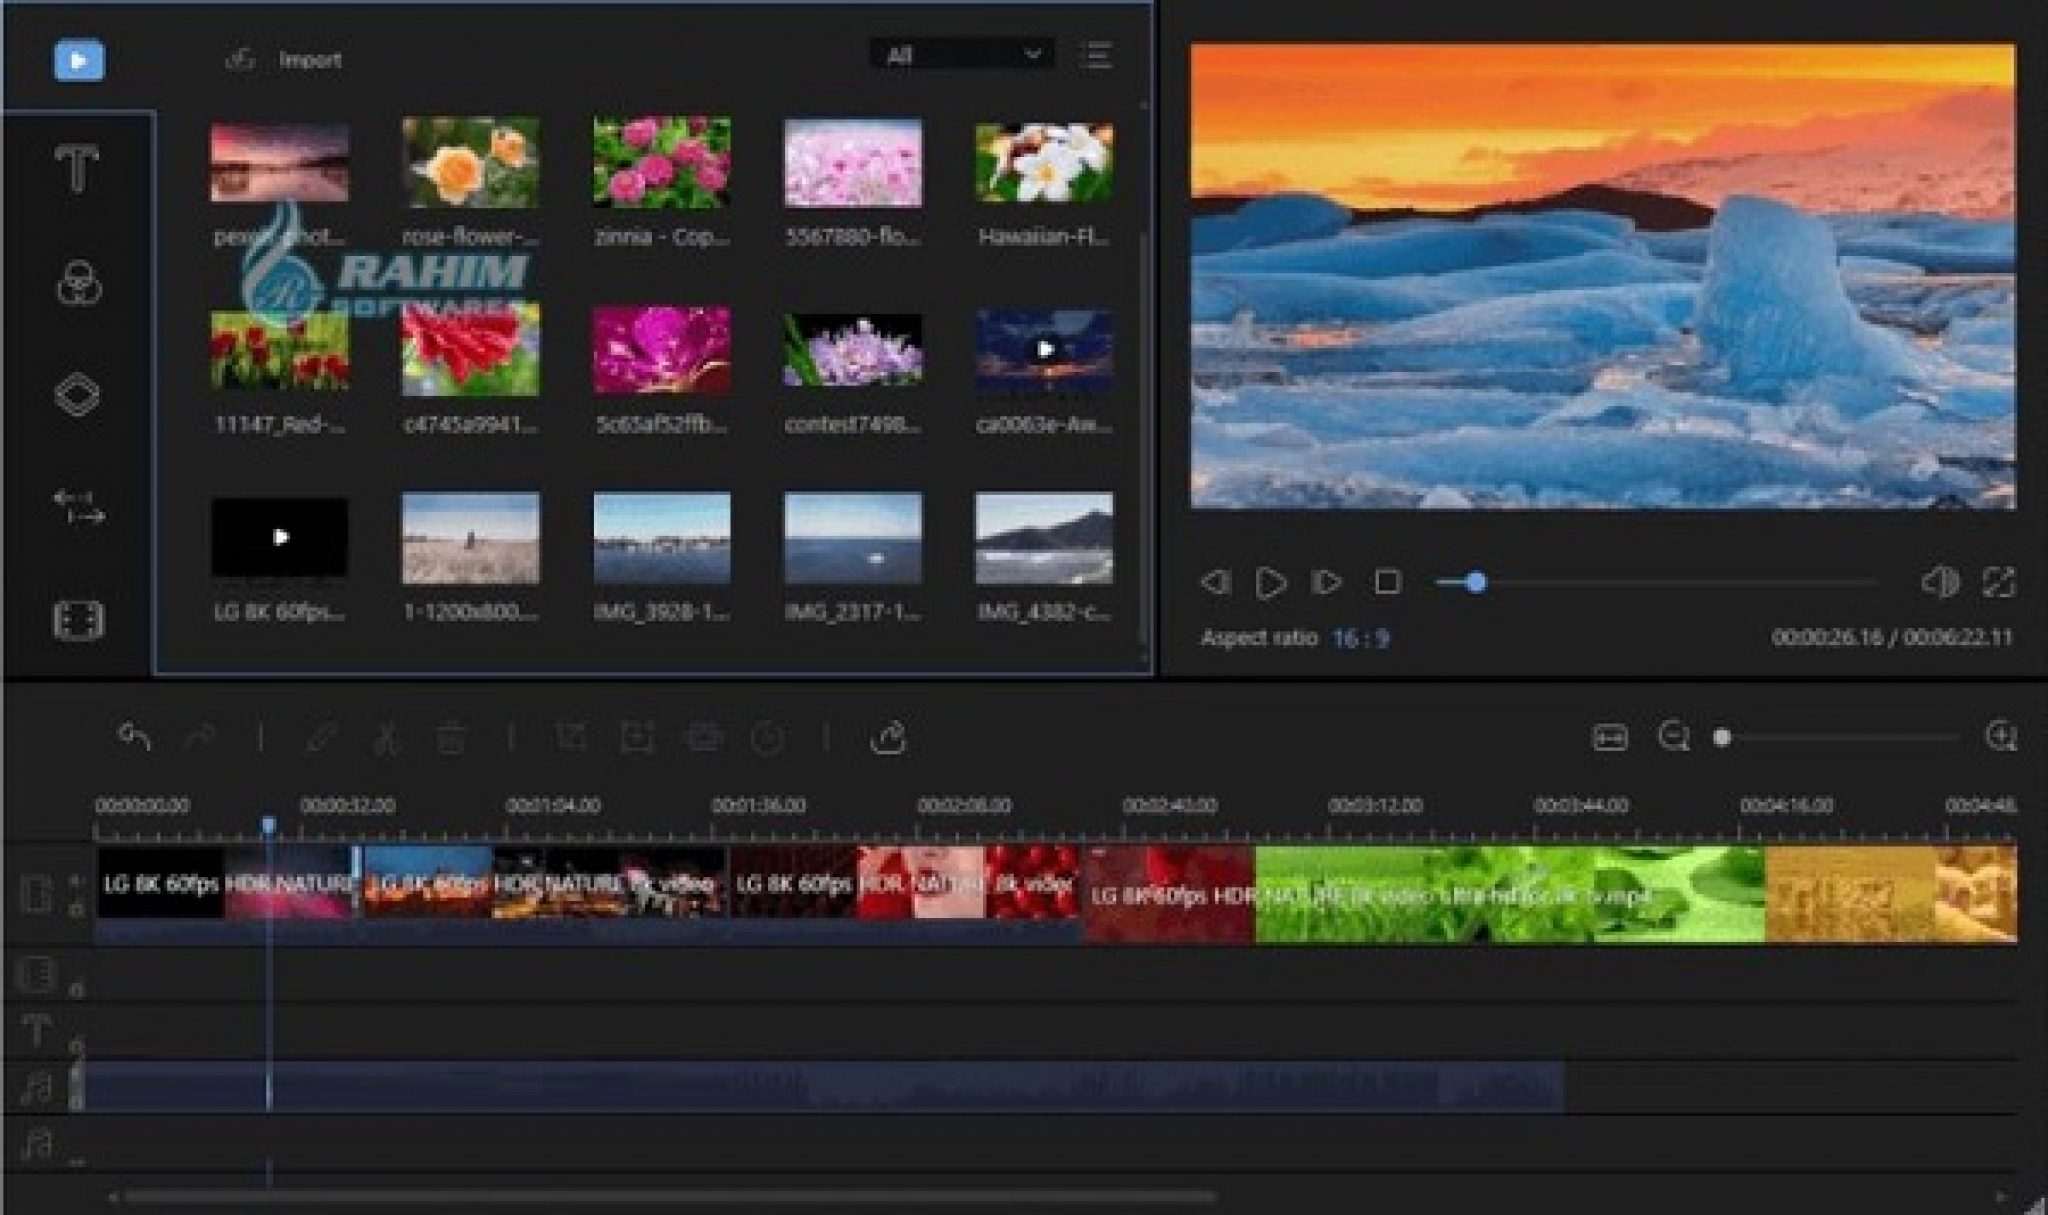 BeeCut Video Editor 1.7.10.2 for iphone download